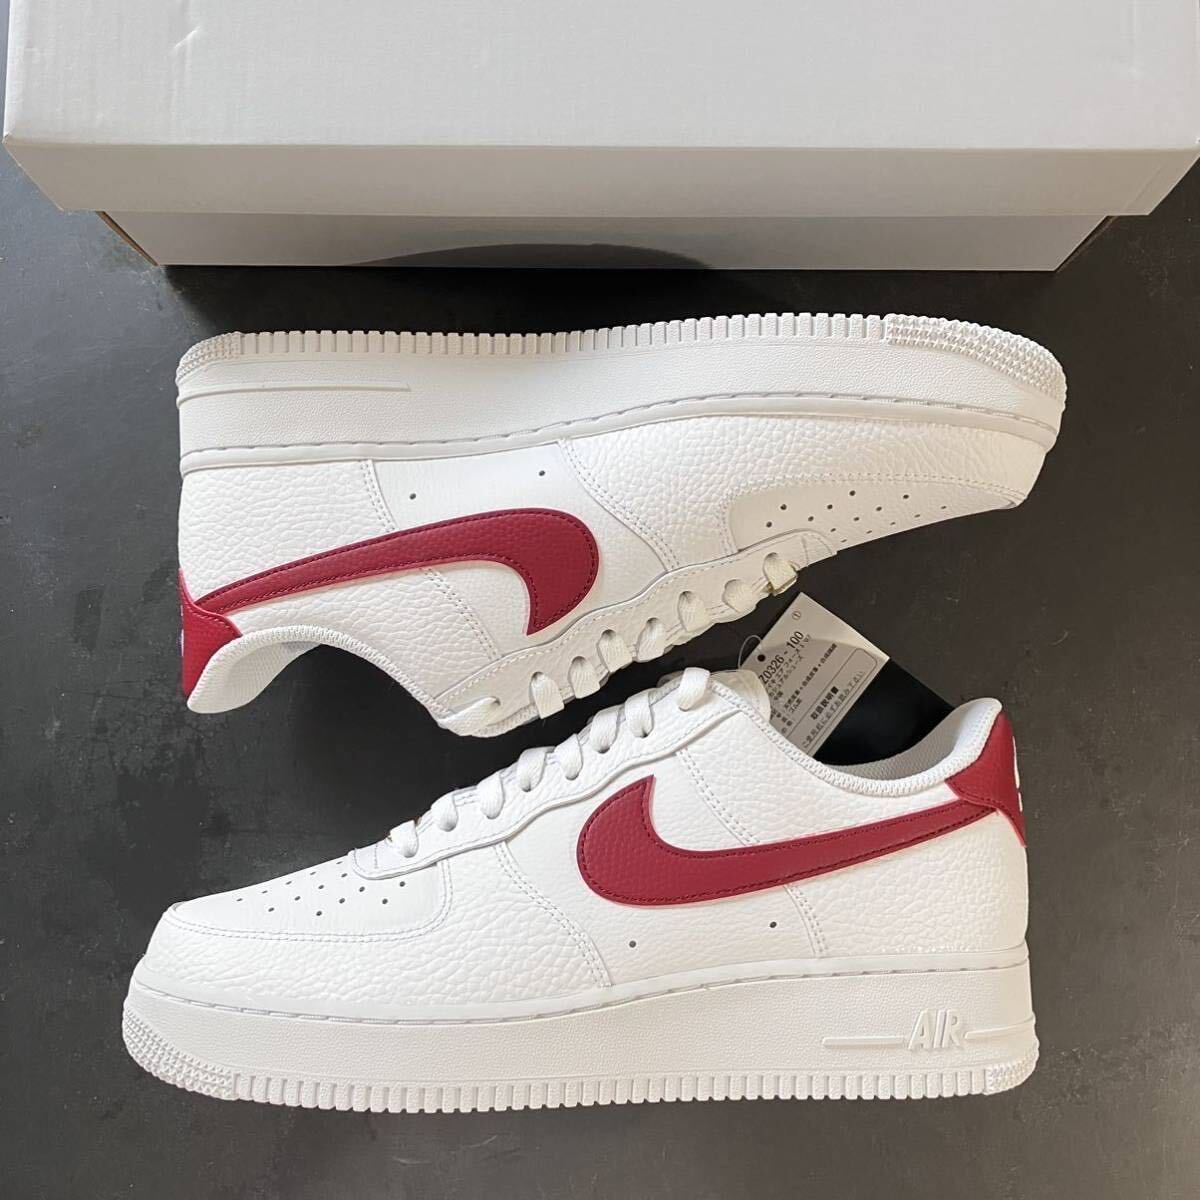 27.5cm NIKE AIR FORCE 1 LOW 07 WHITE RED CZ0326-100 ナイキ エア フォース ワン ロー ローカット ホワイト レッド_画像2